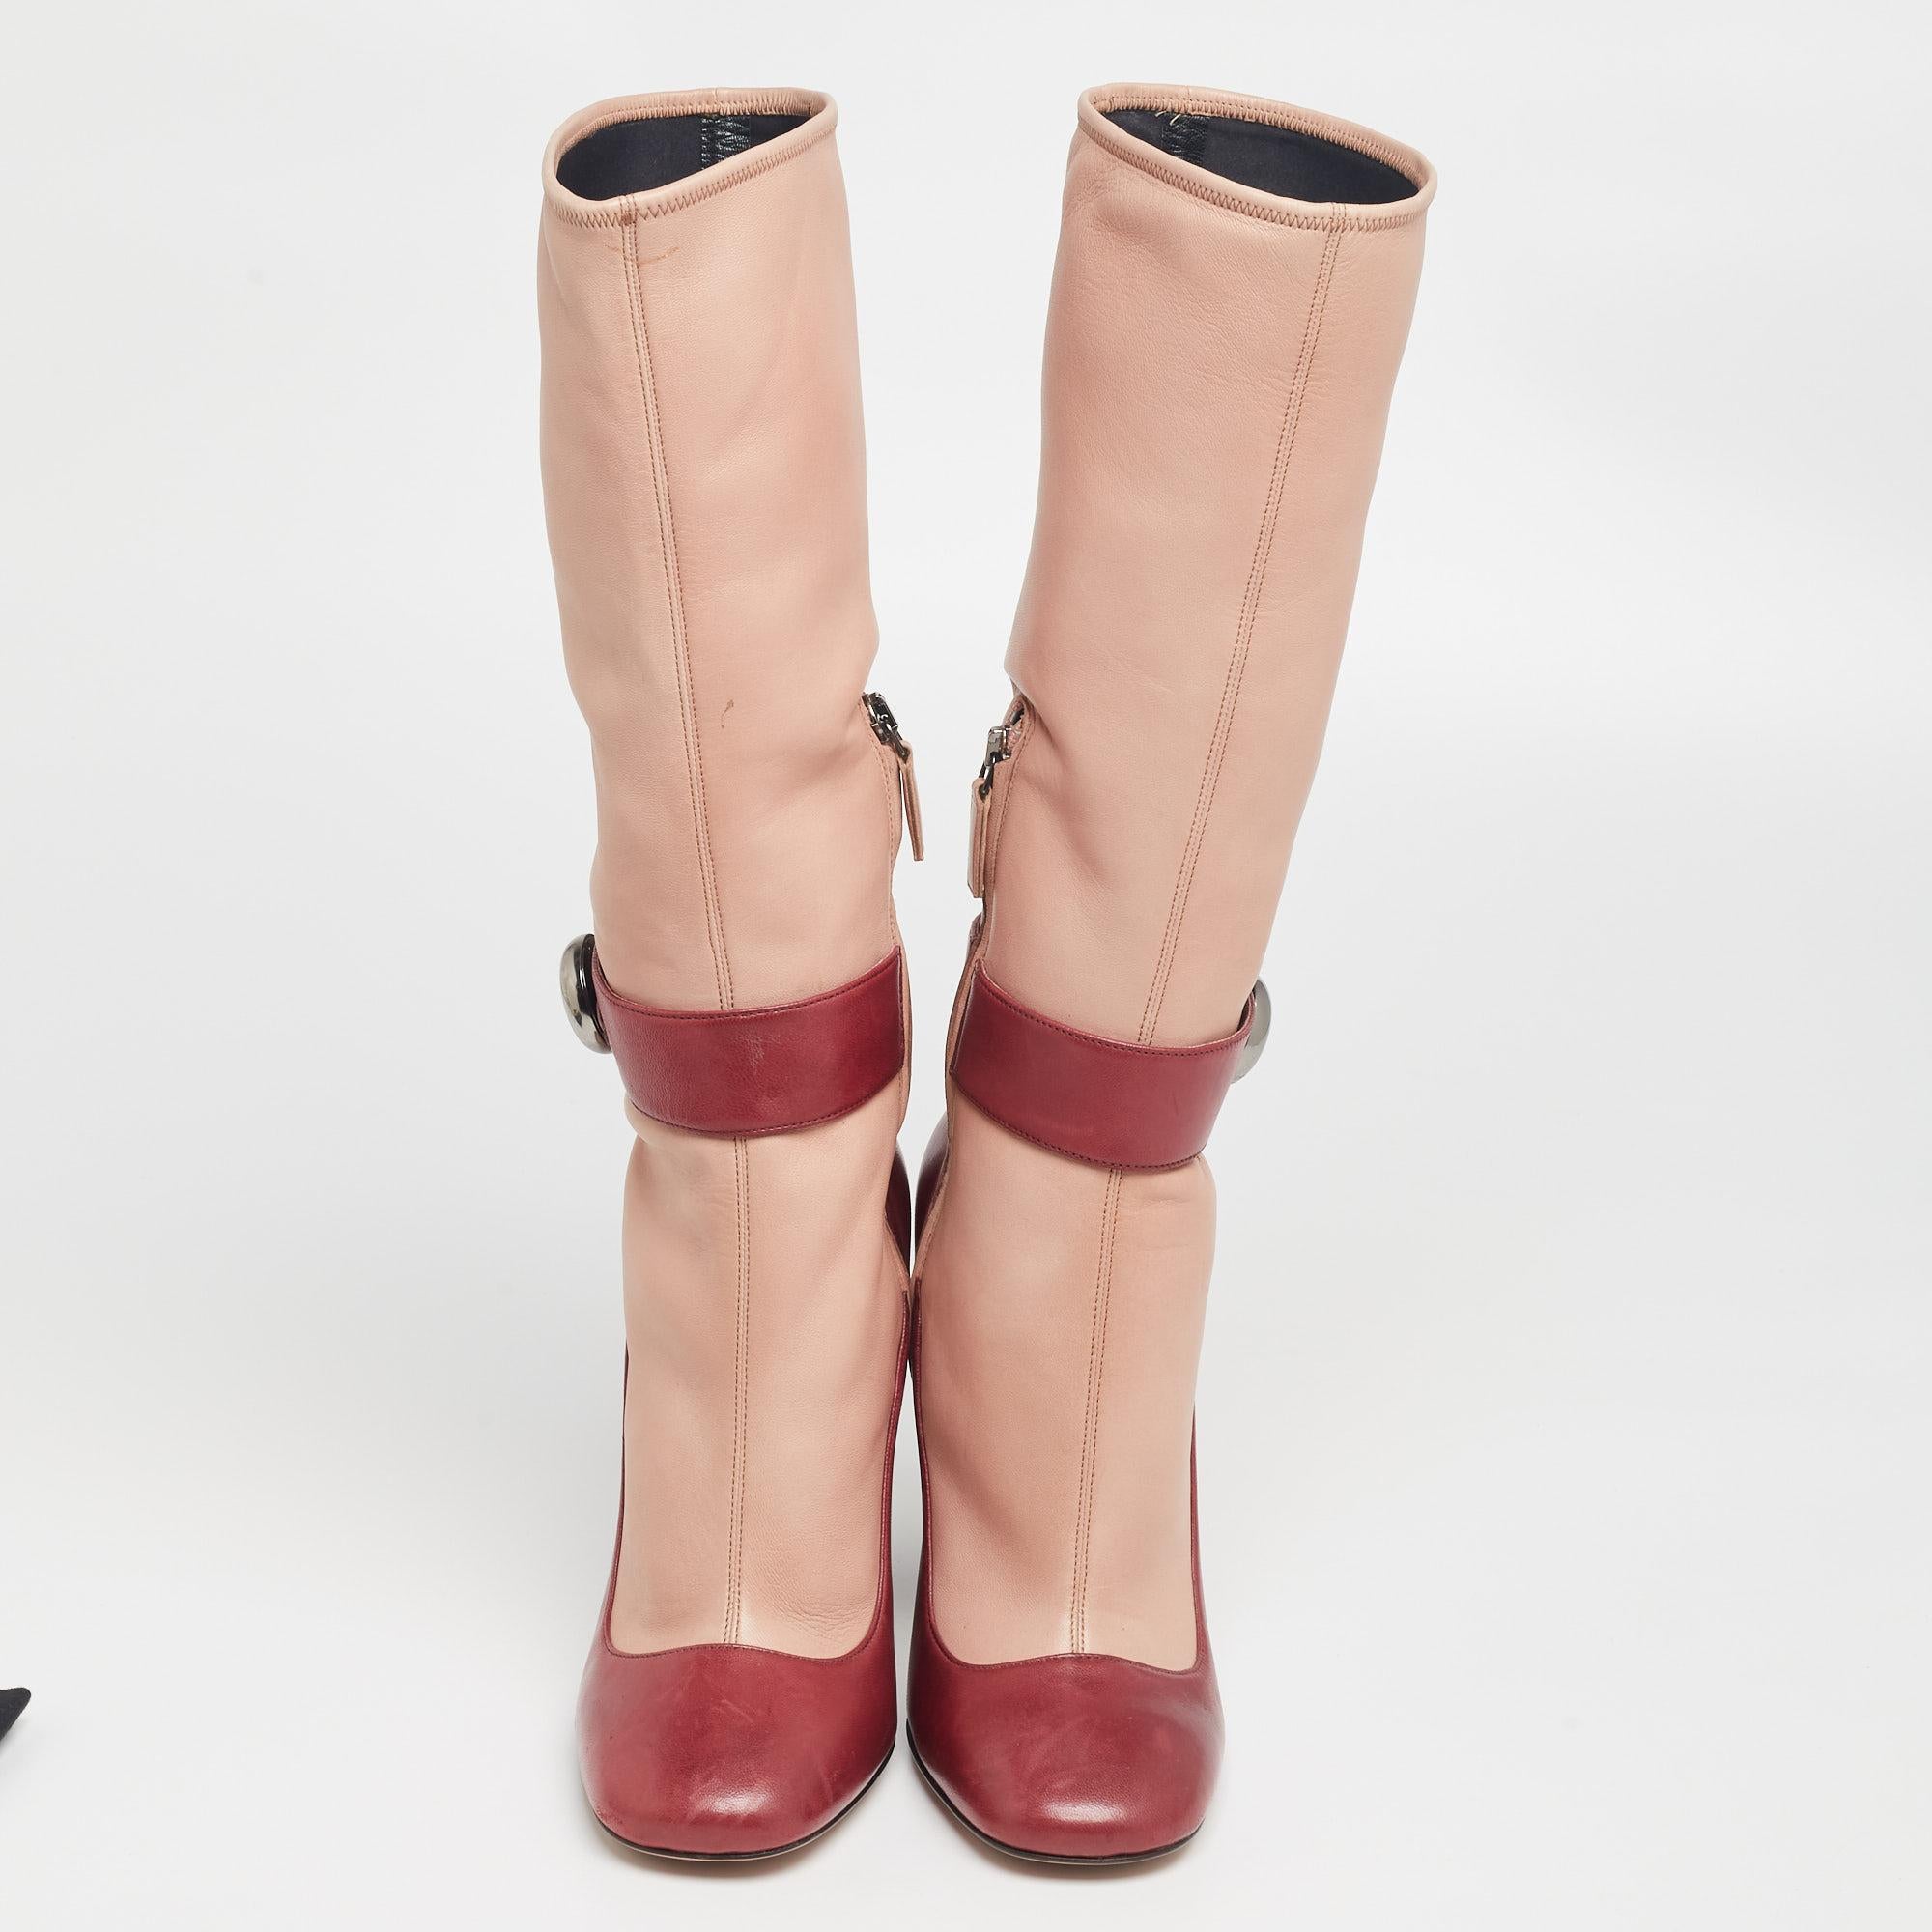 This pair is designed to project an effortless luxe style. These boots by Prada are crafted from quality materials into a refined silhouette. They are equipped with stylish closure, comfortable insoles, and a sturdy sole for lasting wear. Pair them